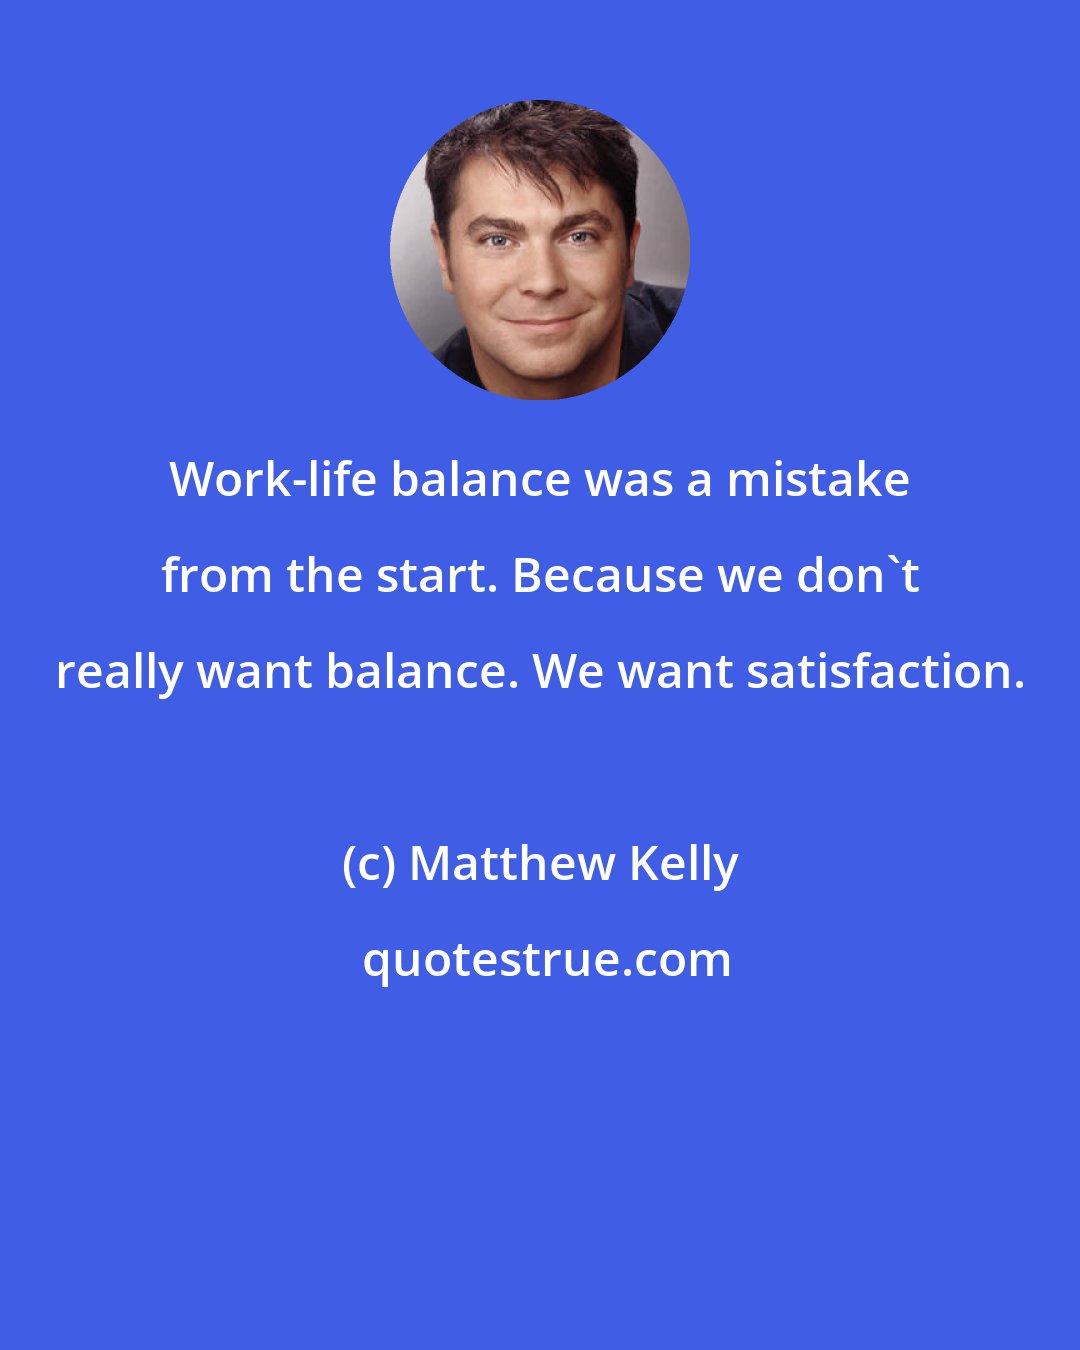 Matthew Kelly: Work-life balance was a mistake from the start. Because we don't really want balance. We want satisfaction.